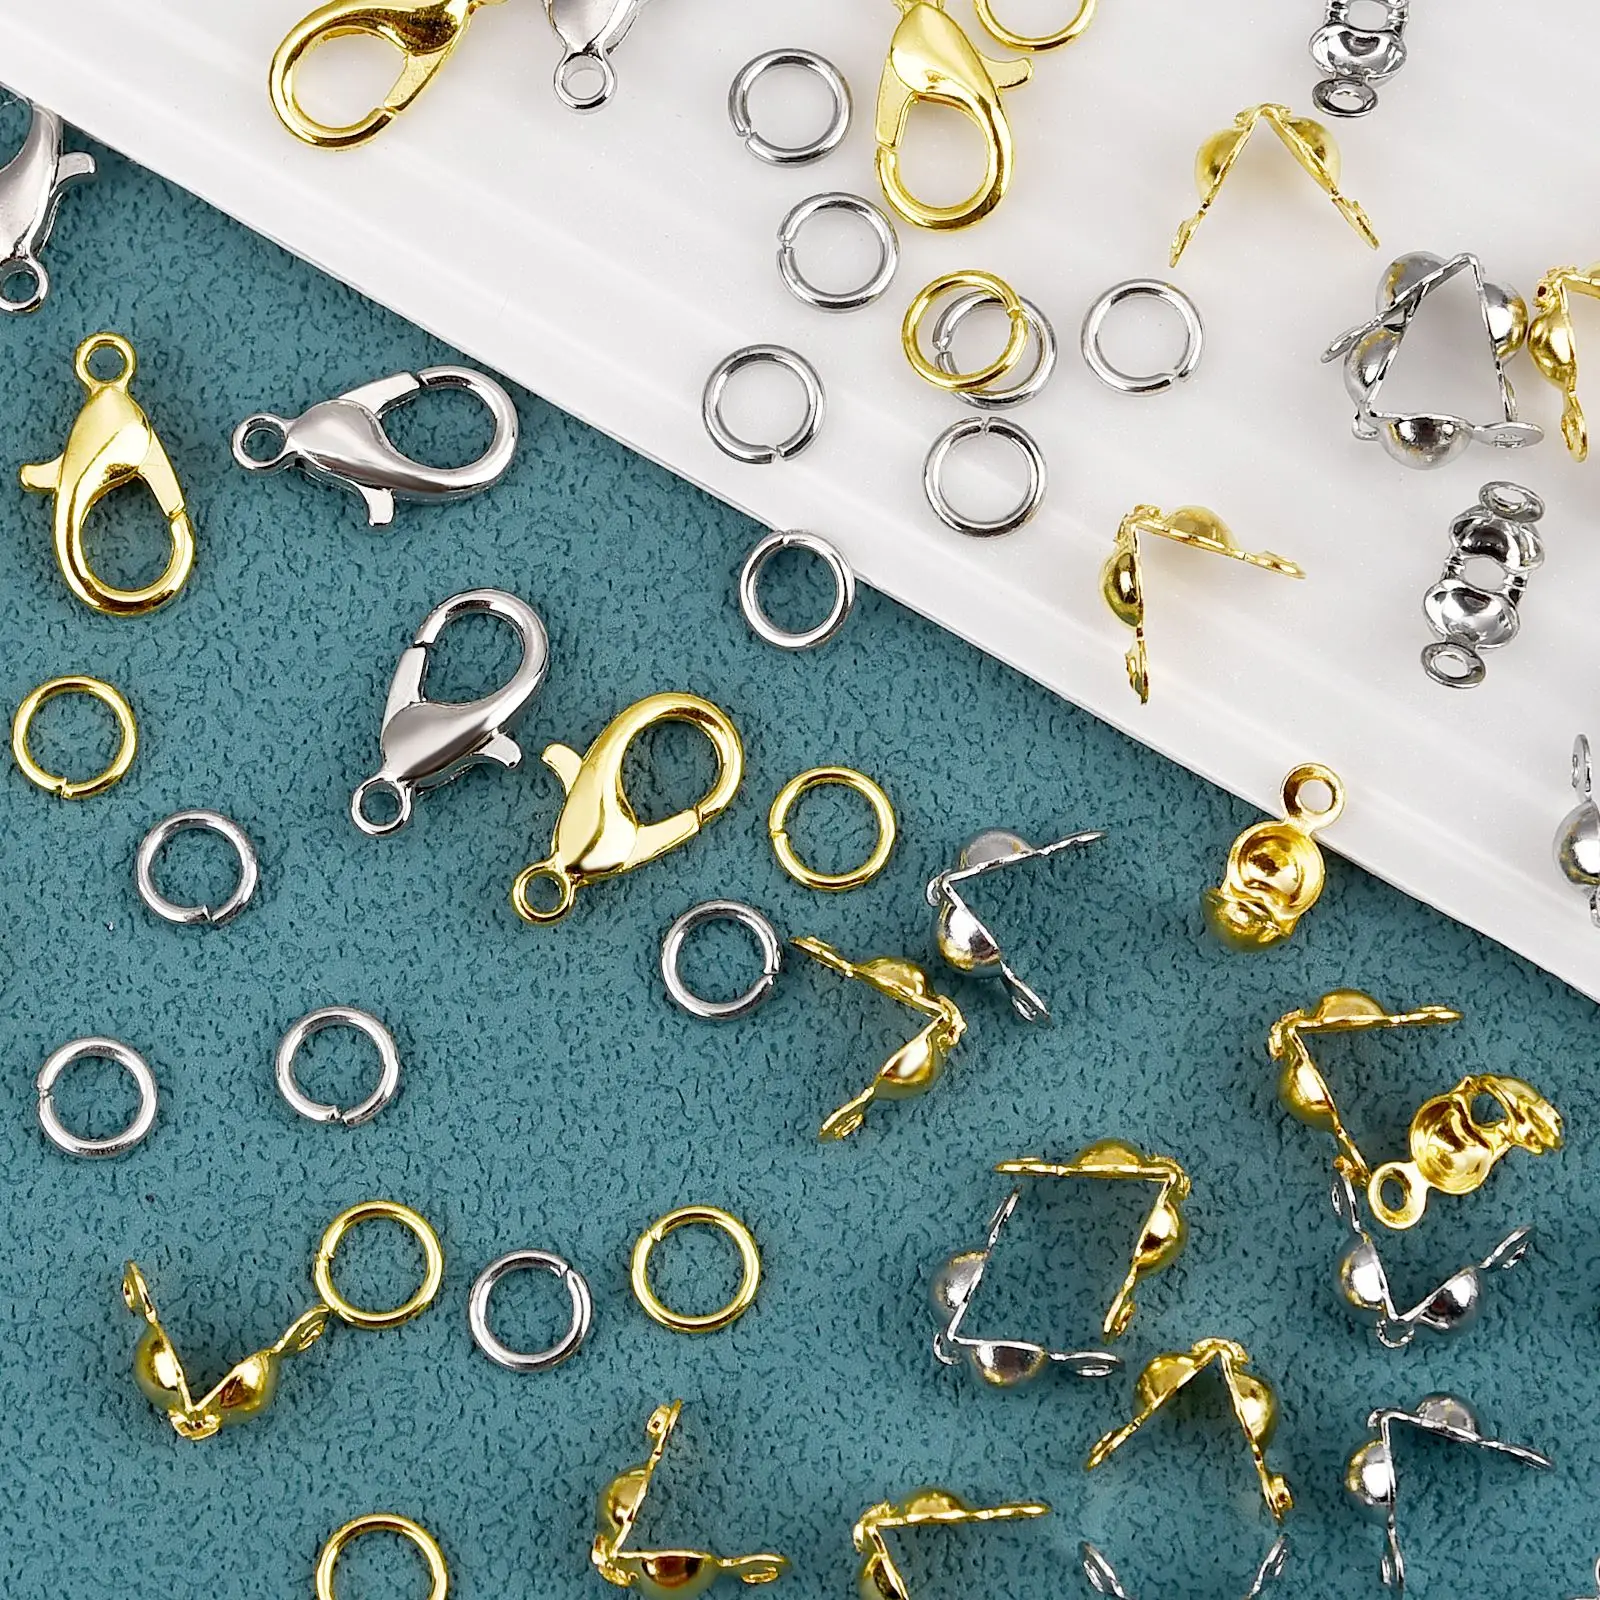 400PCS Jewelry Clasps with Open Jump Rings, Lobster Claw Clasps